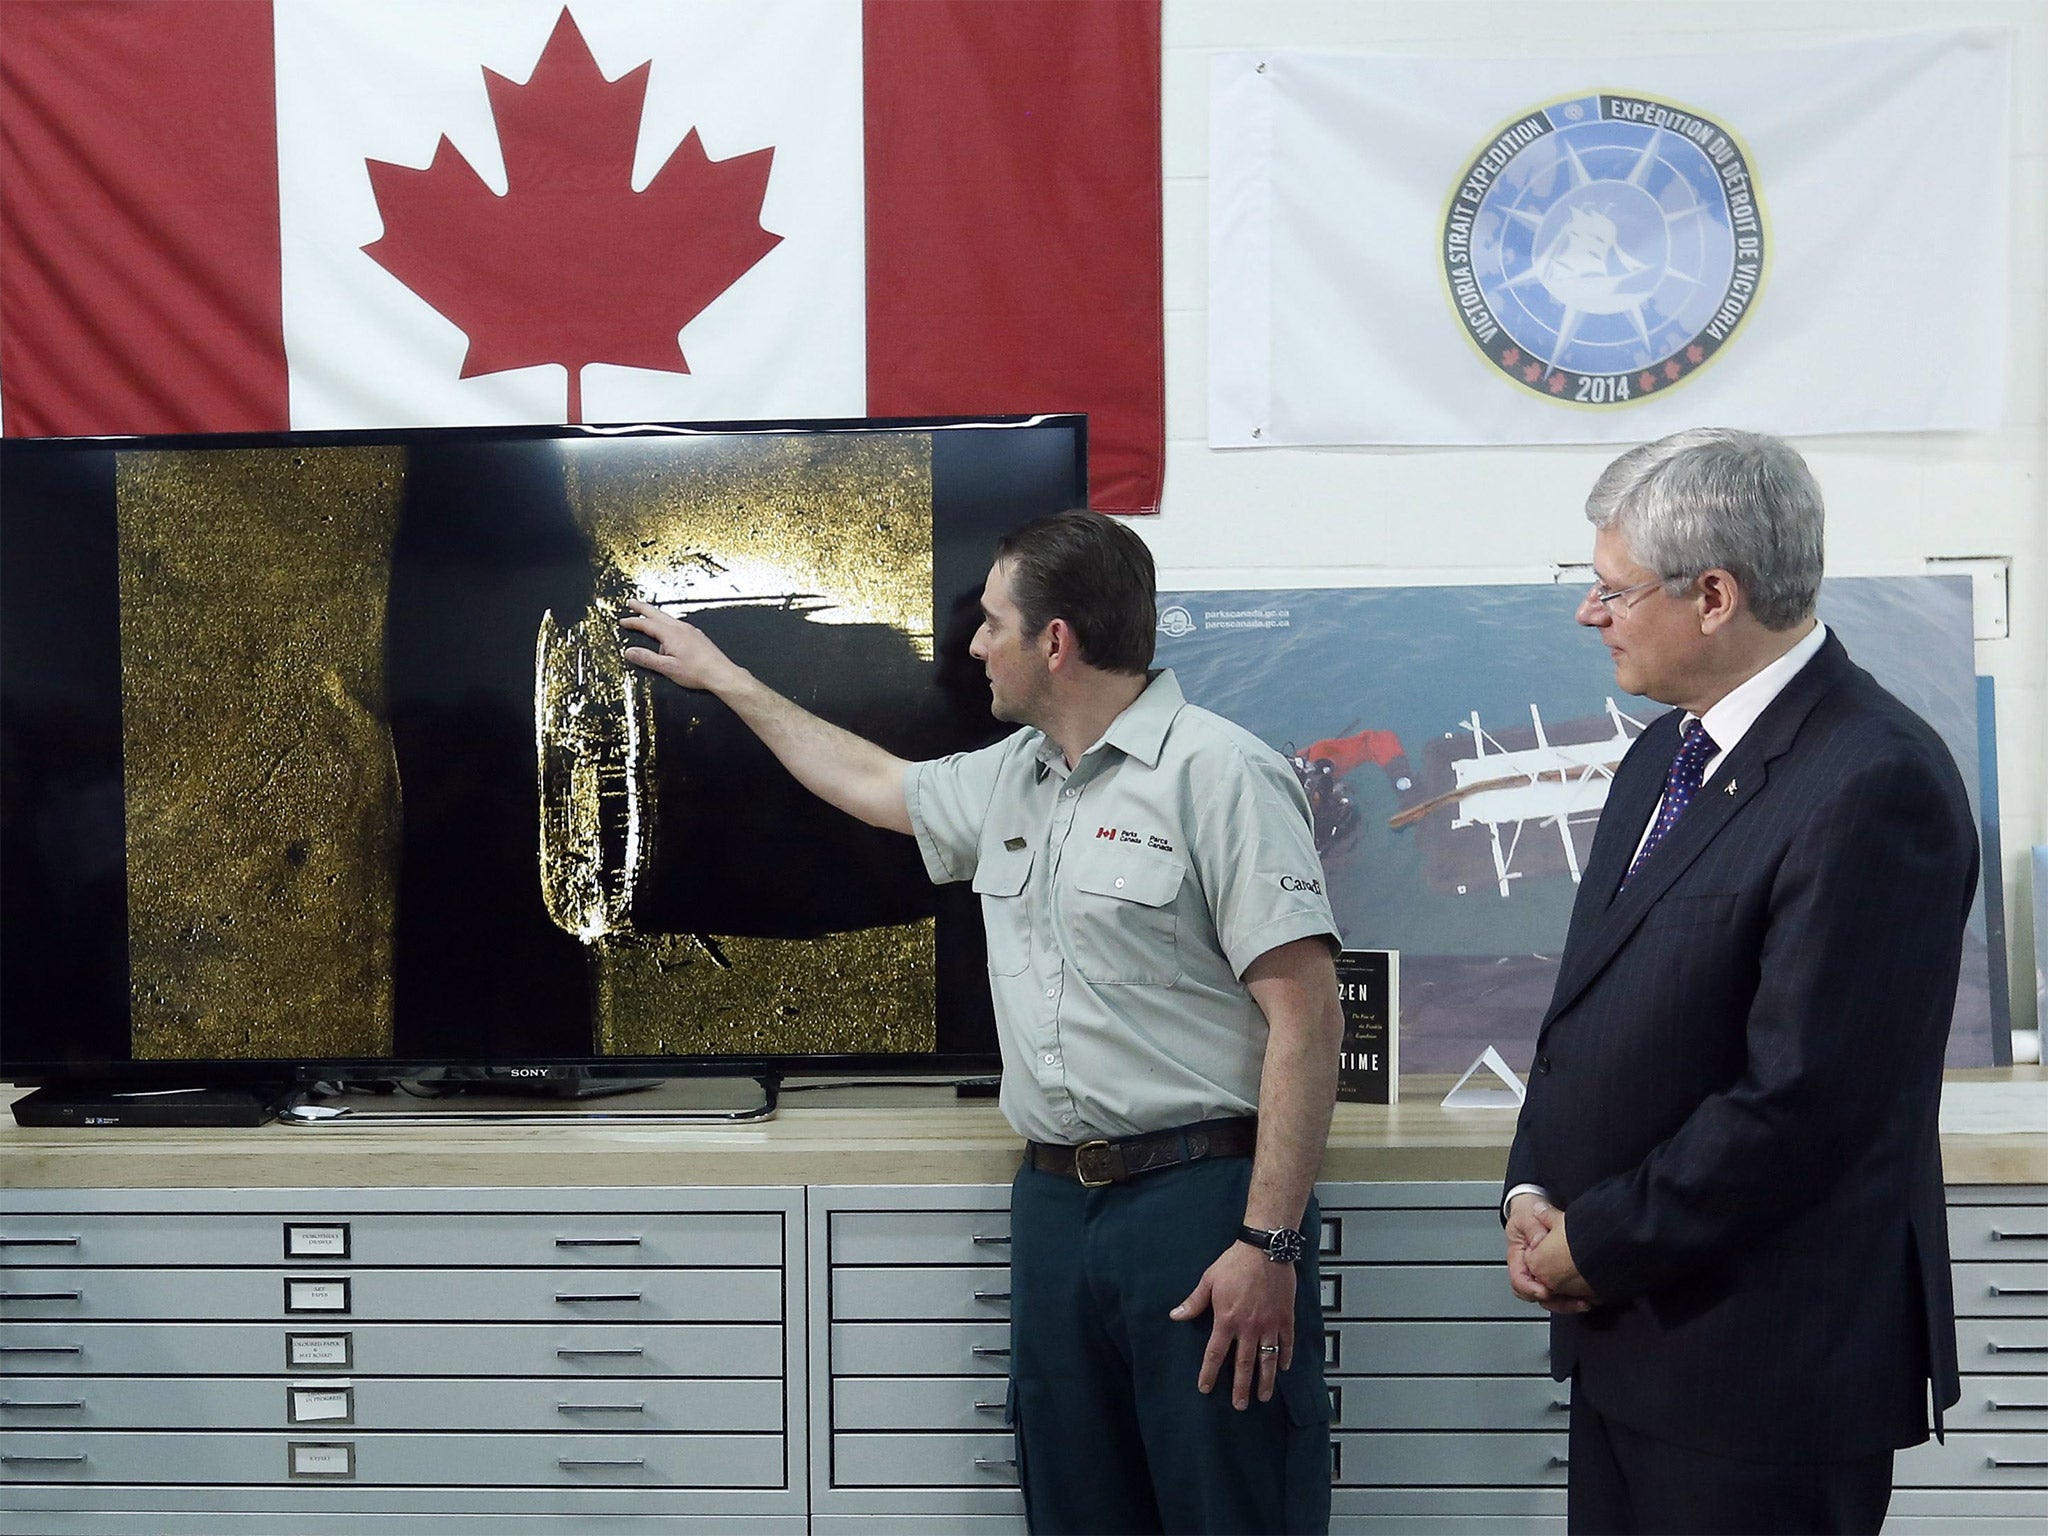 Canadian Prime Minister Stephen Harper listens as Parks Canada's Ryan Harris talks about an image showing one of two ships from the lost Franklin expedition